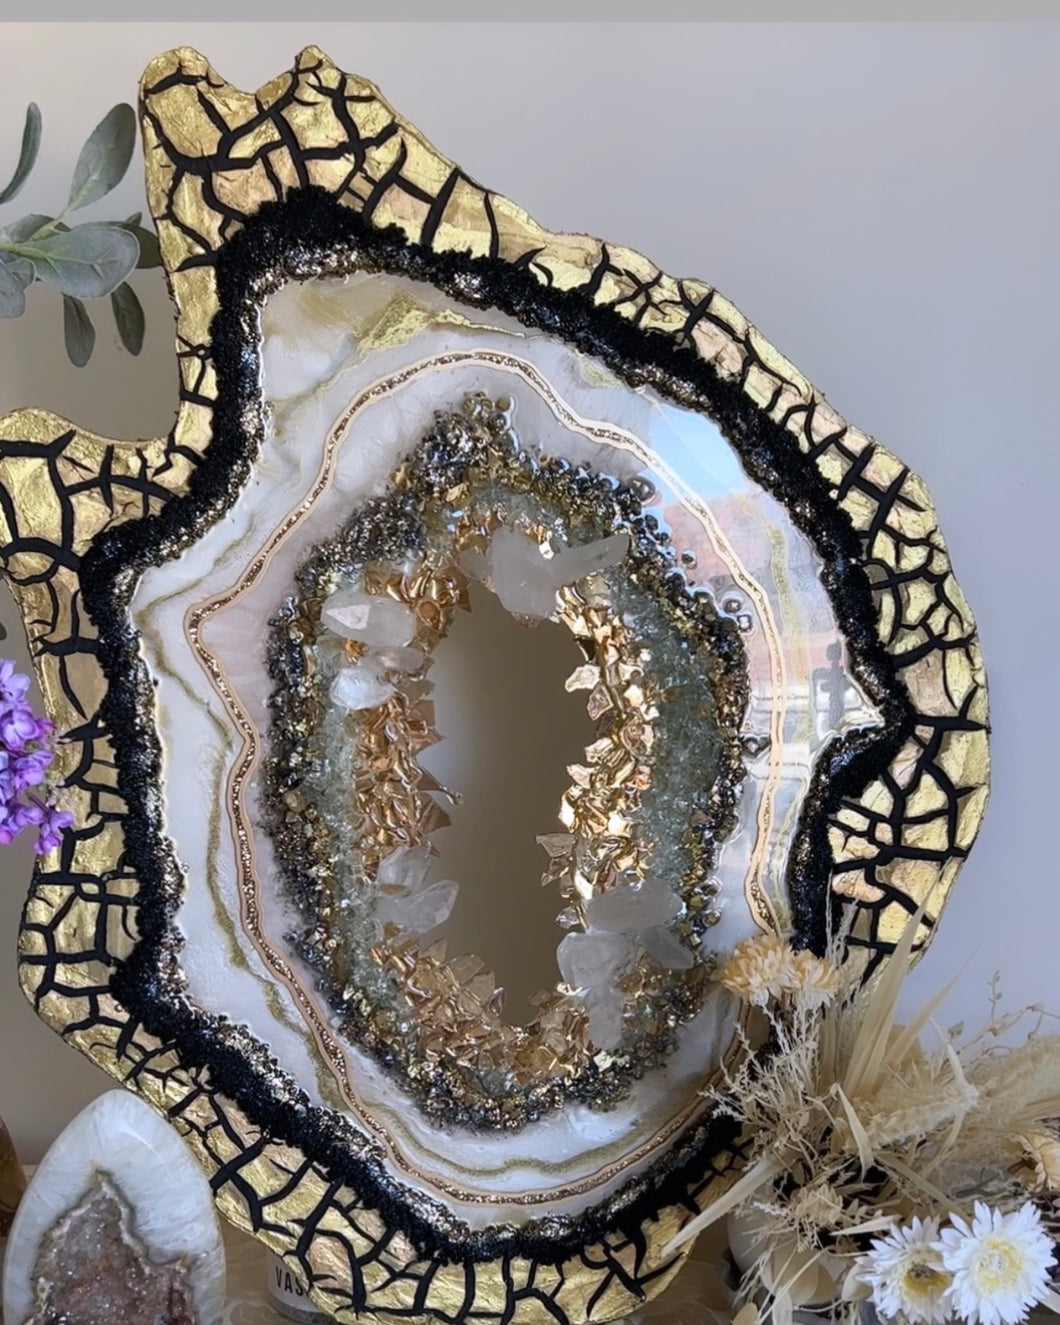 Large Freeform Resin Geode With Crackle Edge